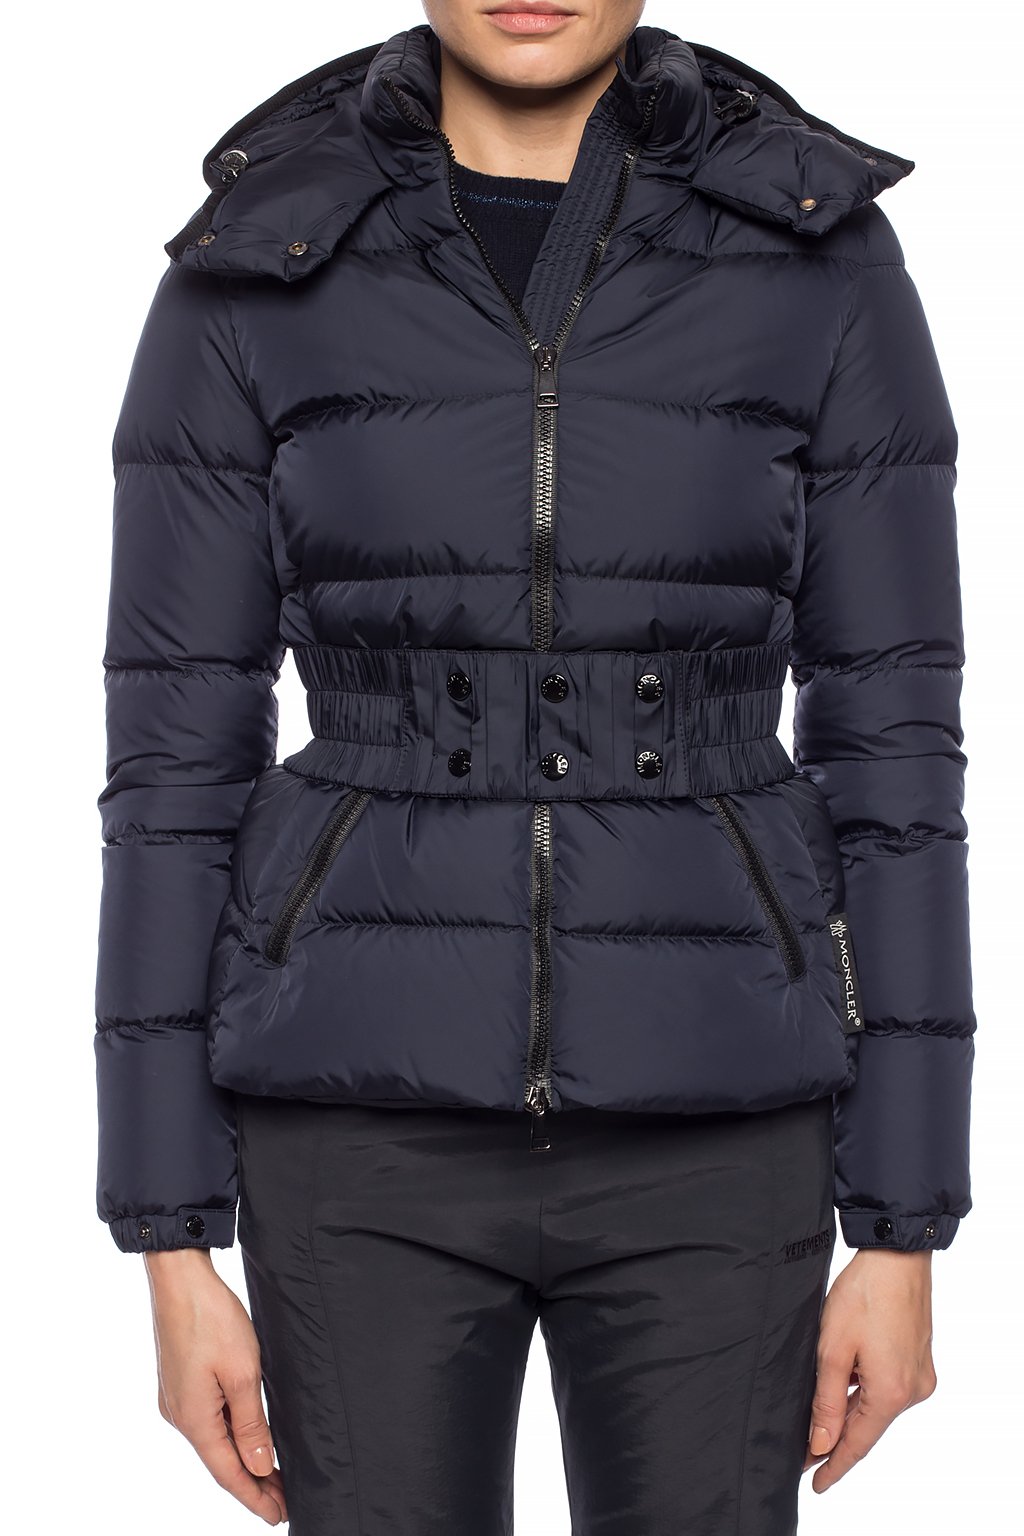 Moncler 'Don Giubbotto' quilted jacket | Women's Clothing | Vitkac